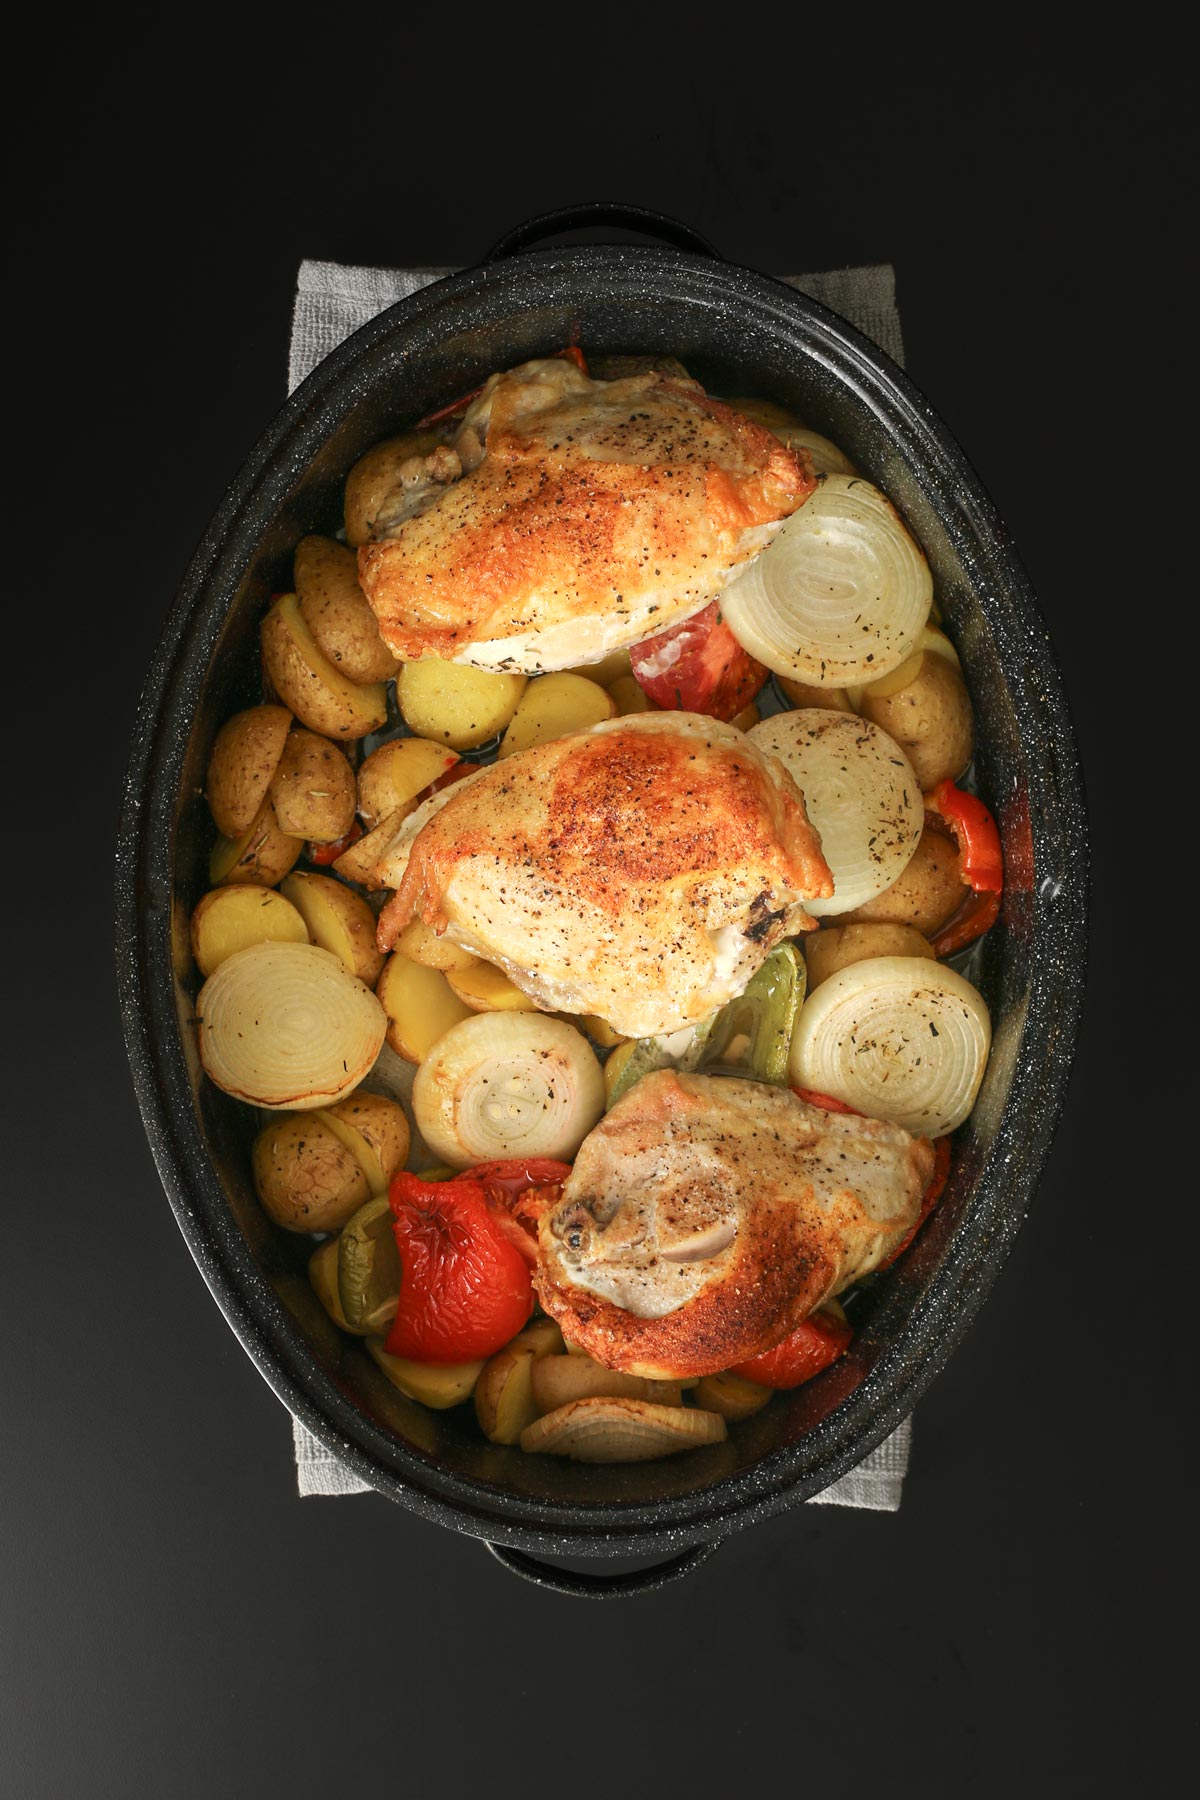 baked chicken breast atop the roasted vegetables in the roasting pan.